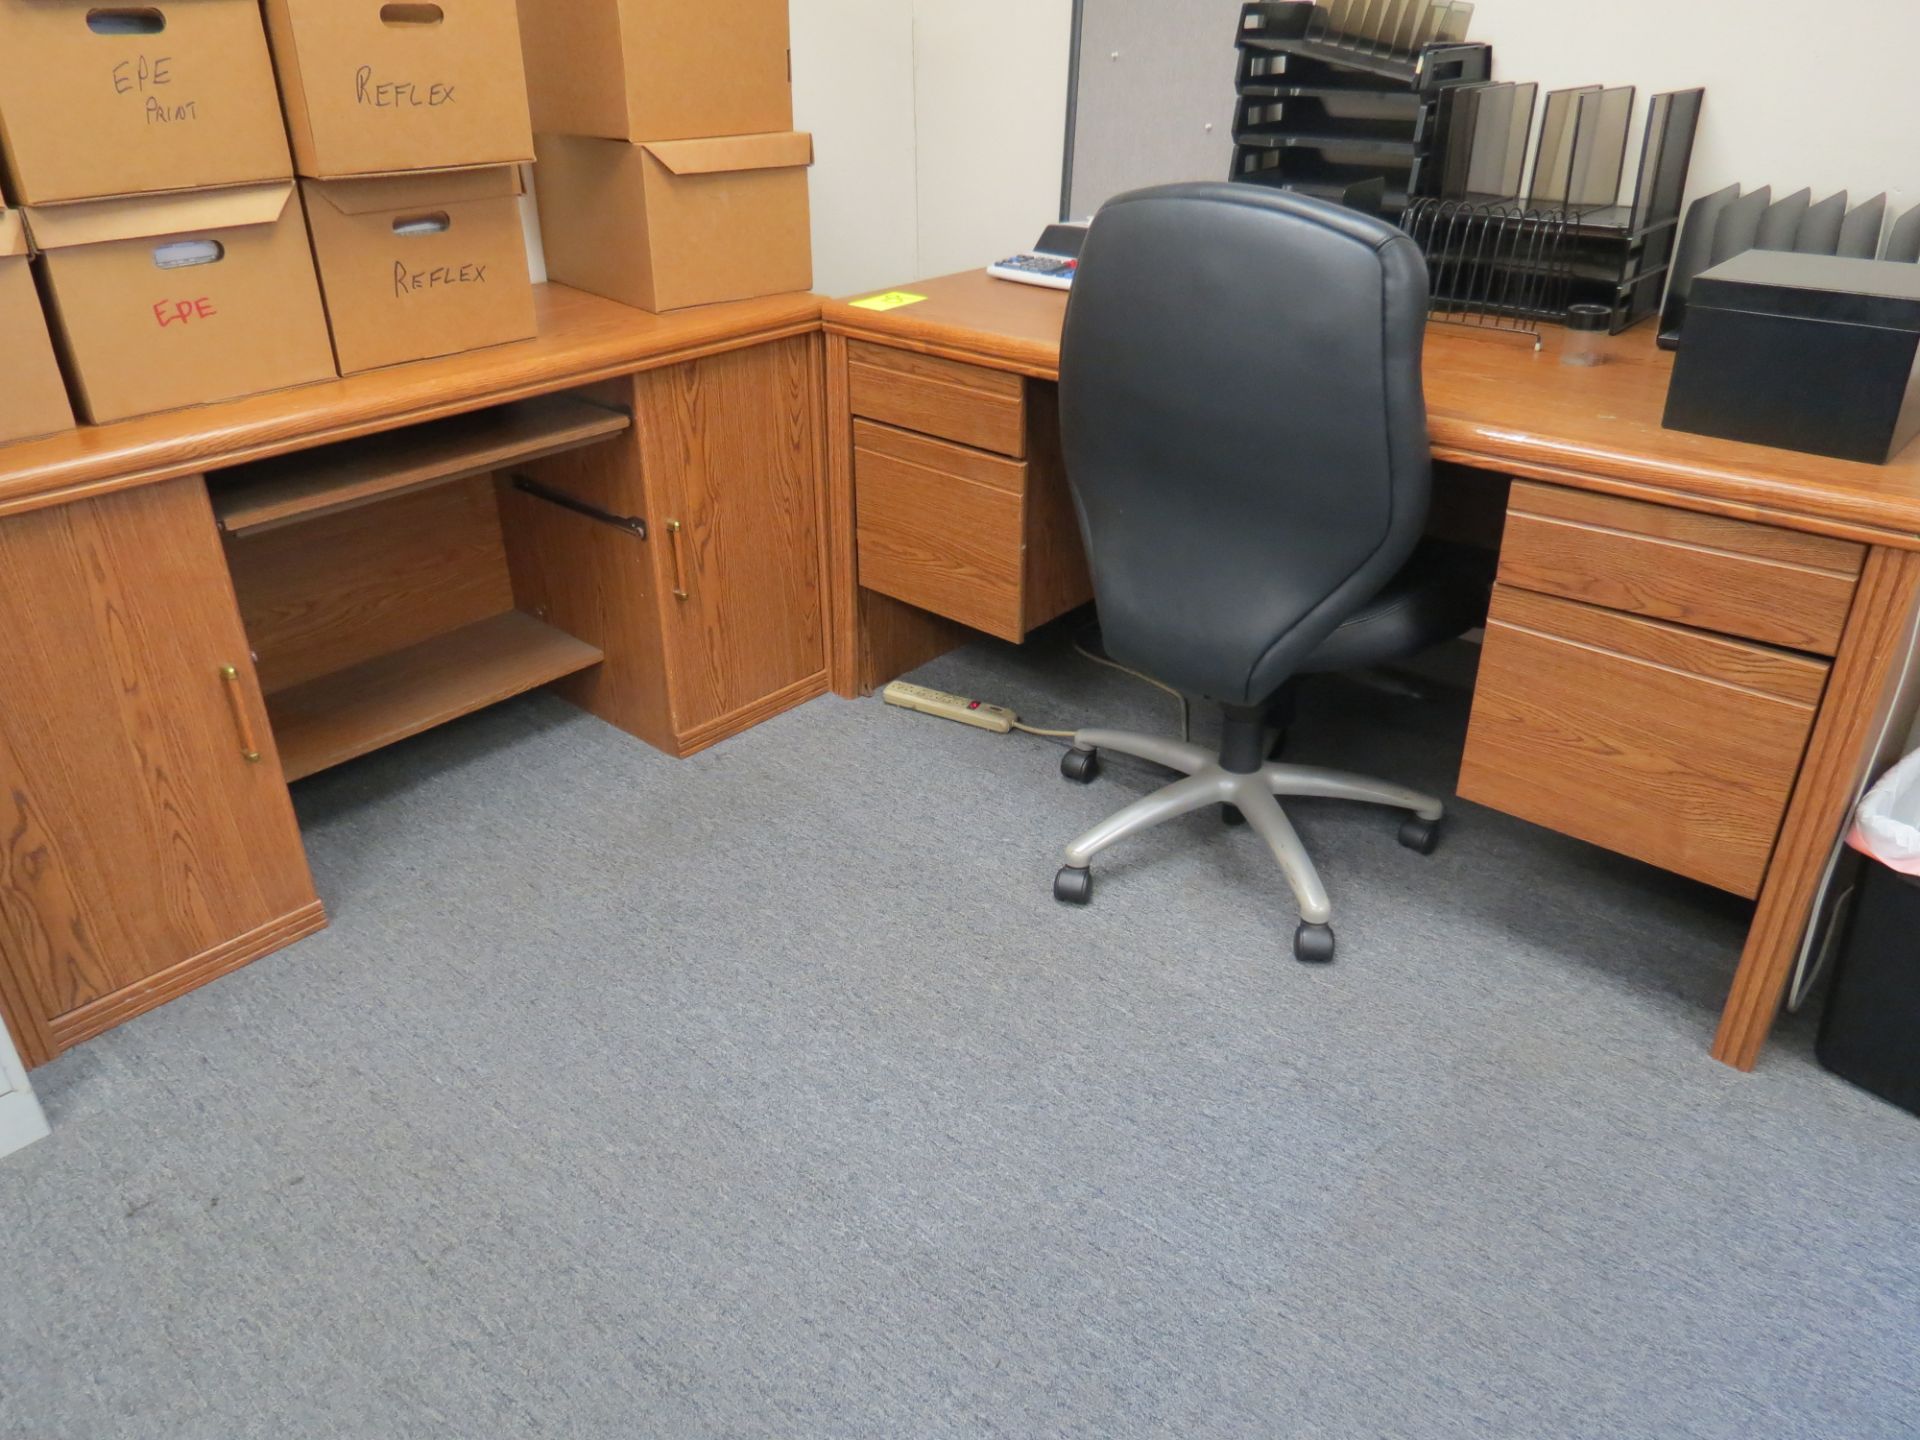 Lot Office Furniture 2-Lamianate Wood Desk with Matching Credenzas, 1-Printer Stand & 2-Chairs